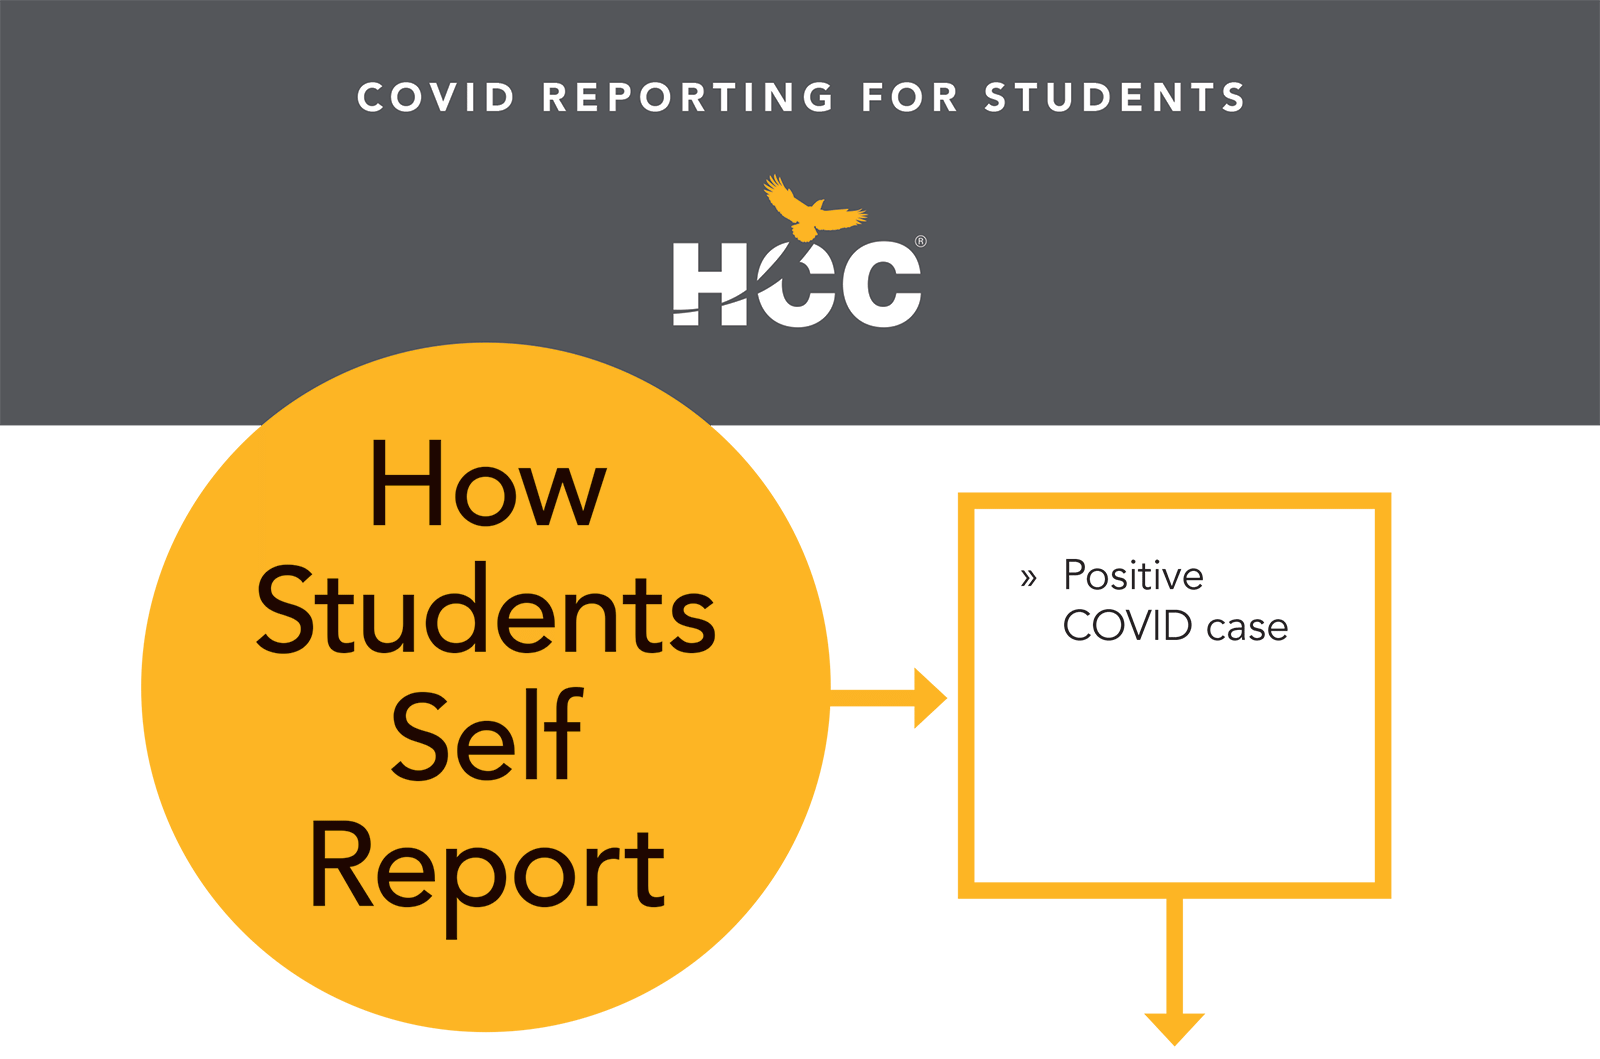 How Students Self Report:  Positive Covid Case